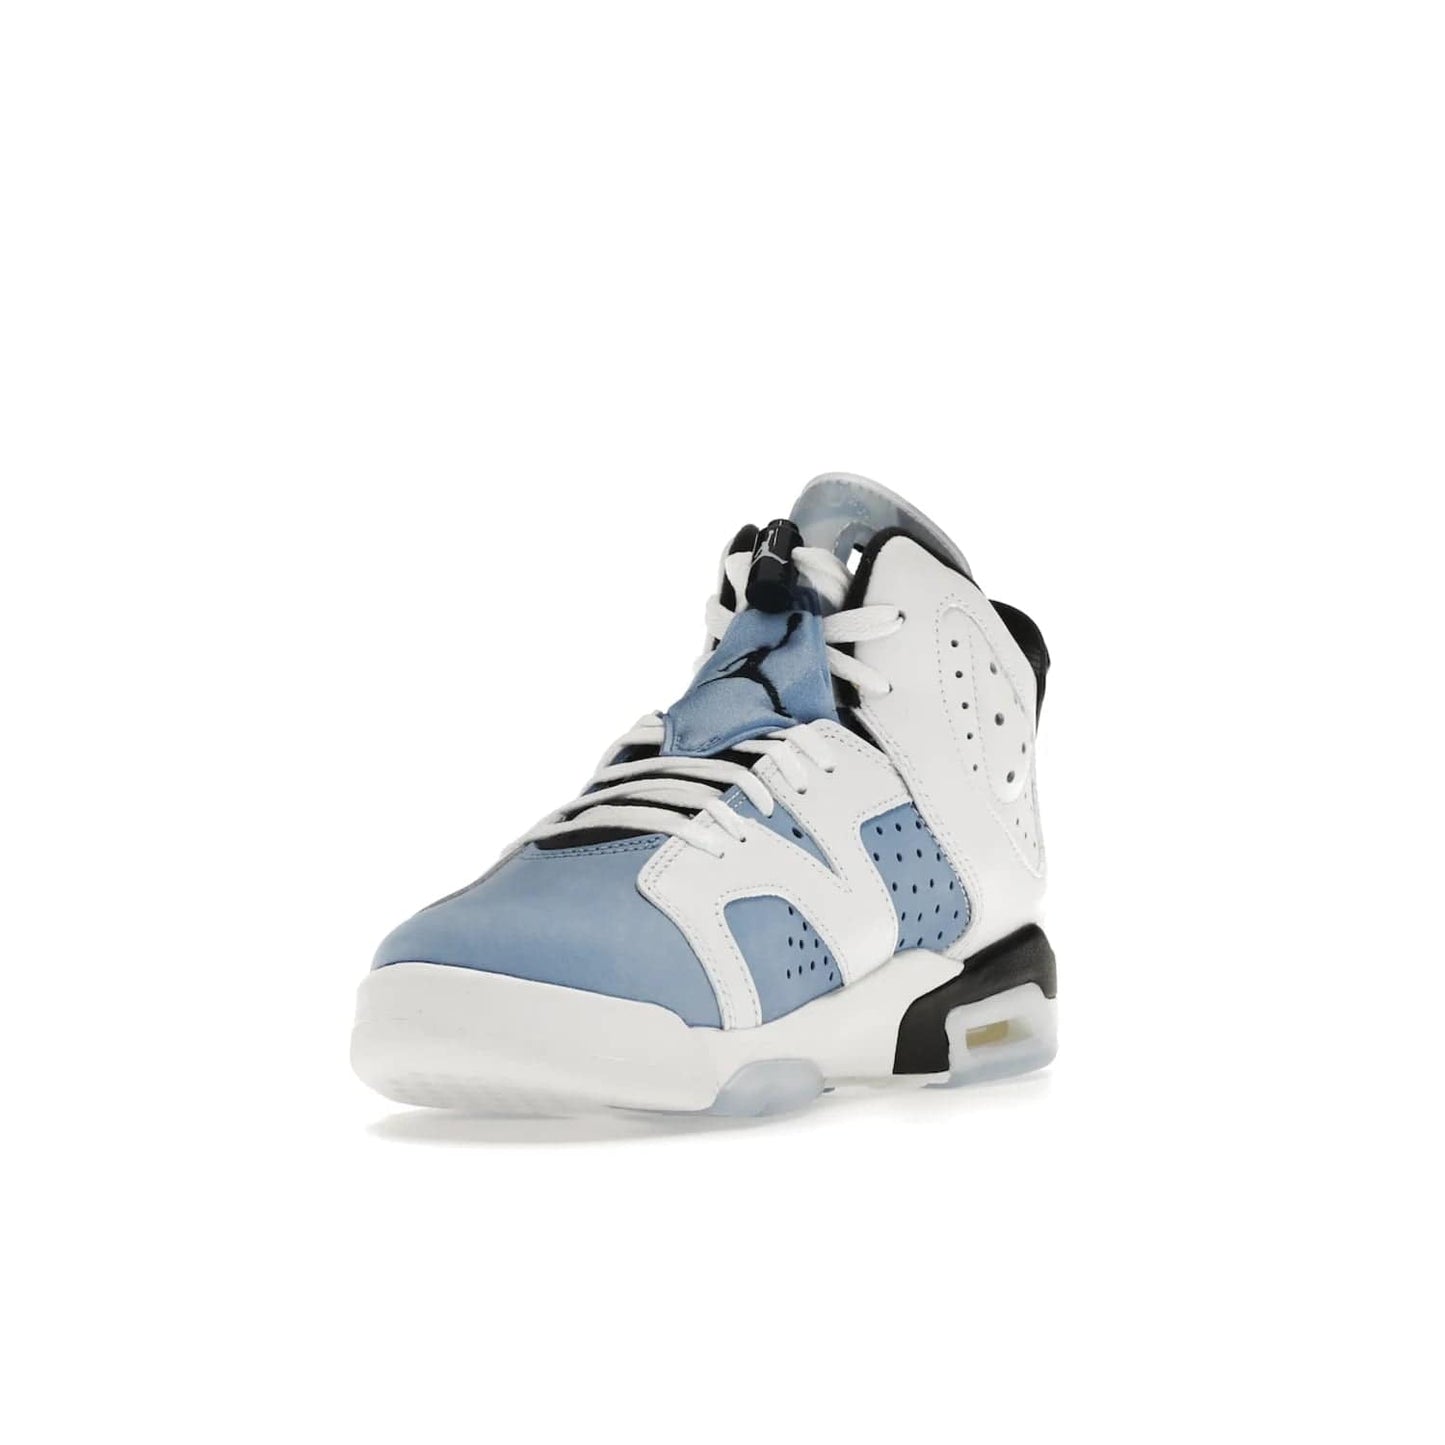 Jordan 6 Retro UNC White (GS) - Image 13 - Only at www.BallersClubKickz.com - Air Jordan 6 Retro UNC White GS: Michael Jordan alma mater, UNC Tar Heels, featuring colorway, nubuck, leather, Jumpman branding and a visible Air unit. Translucent blue/white outsole, perfect for completing sneaker rotation.